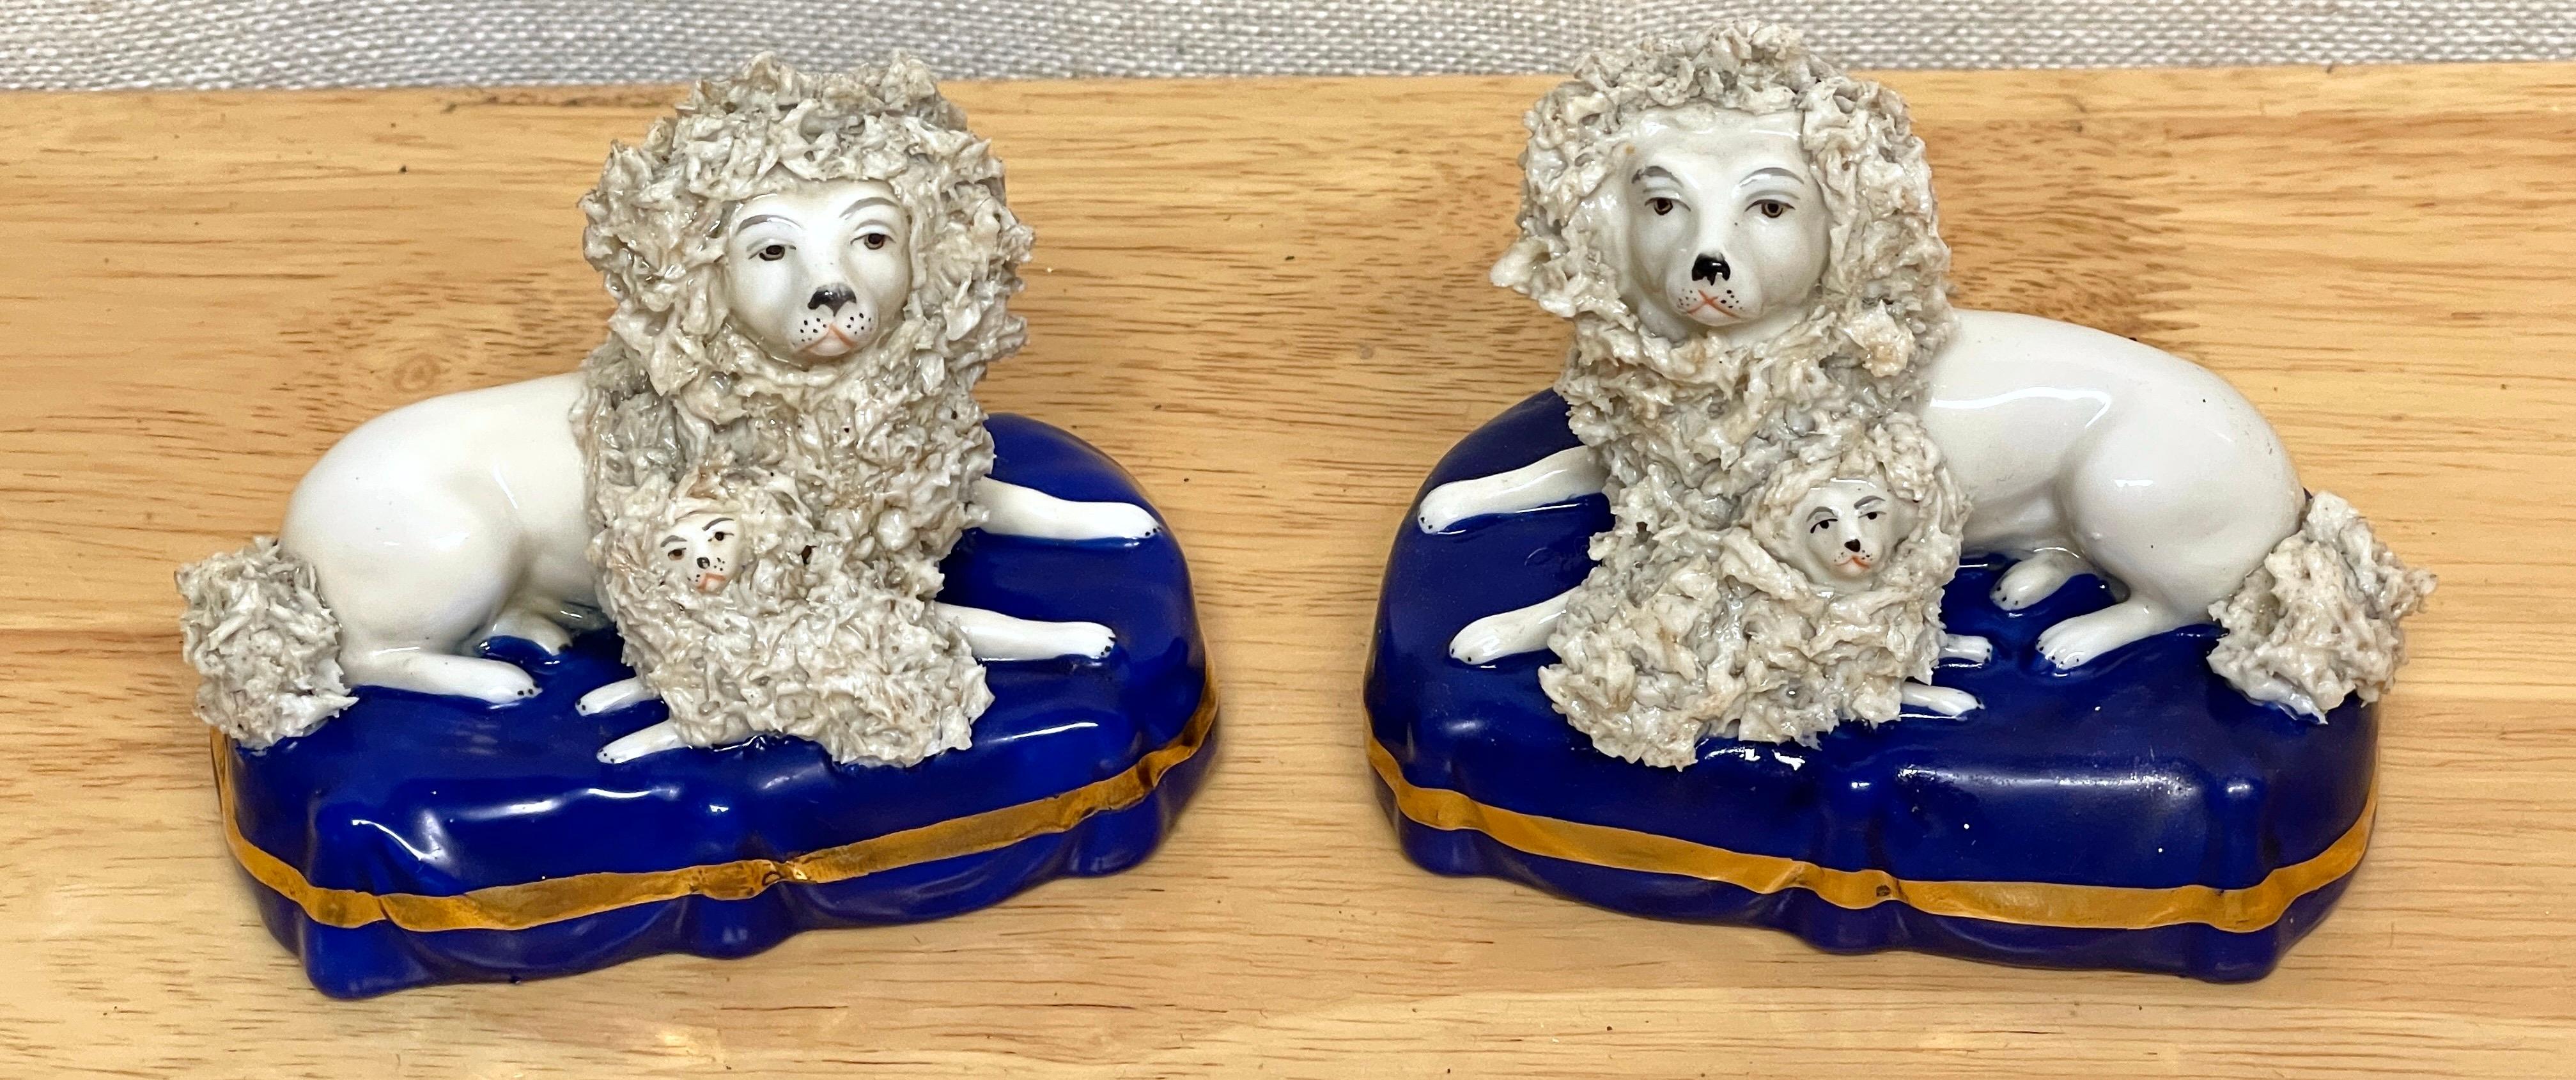 High Victorian Pair of 19th Century Chelsea Porcelain Figures of Seated Poodles & Pups For Sale